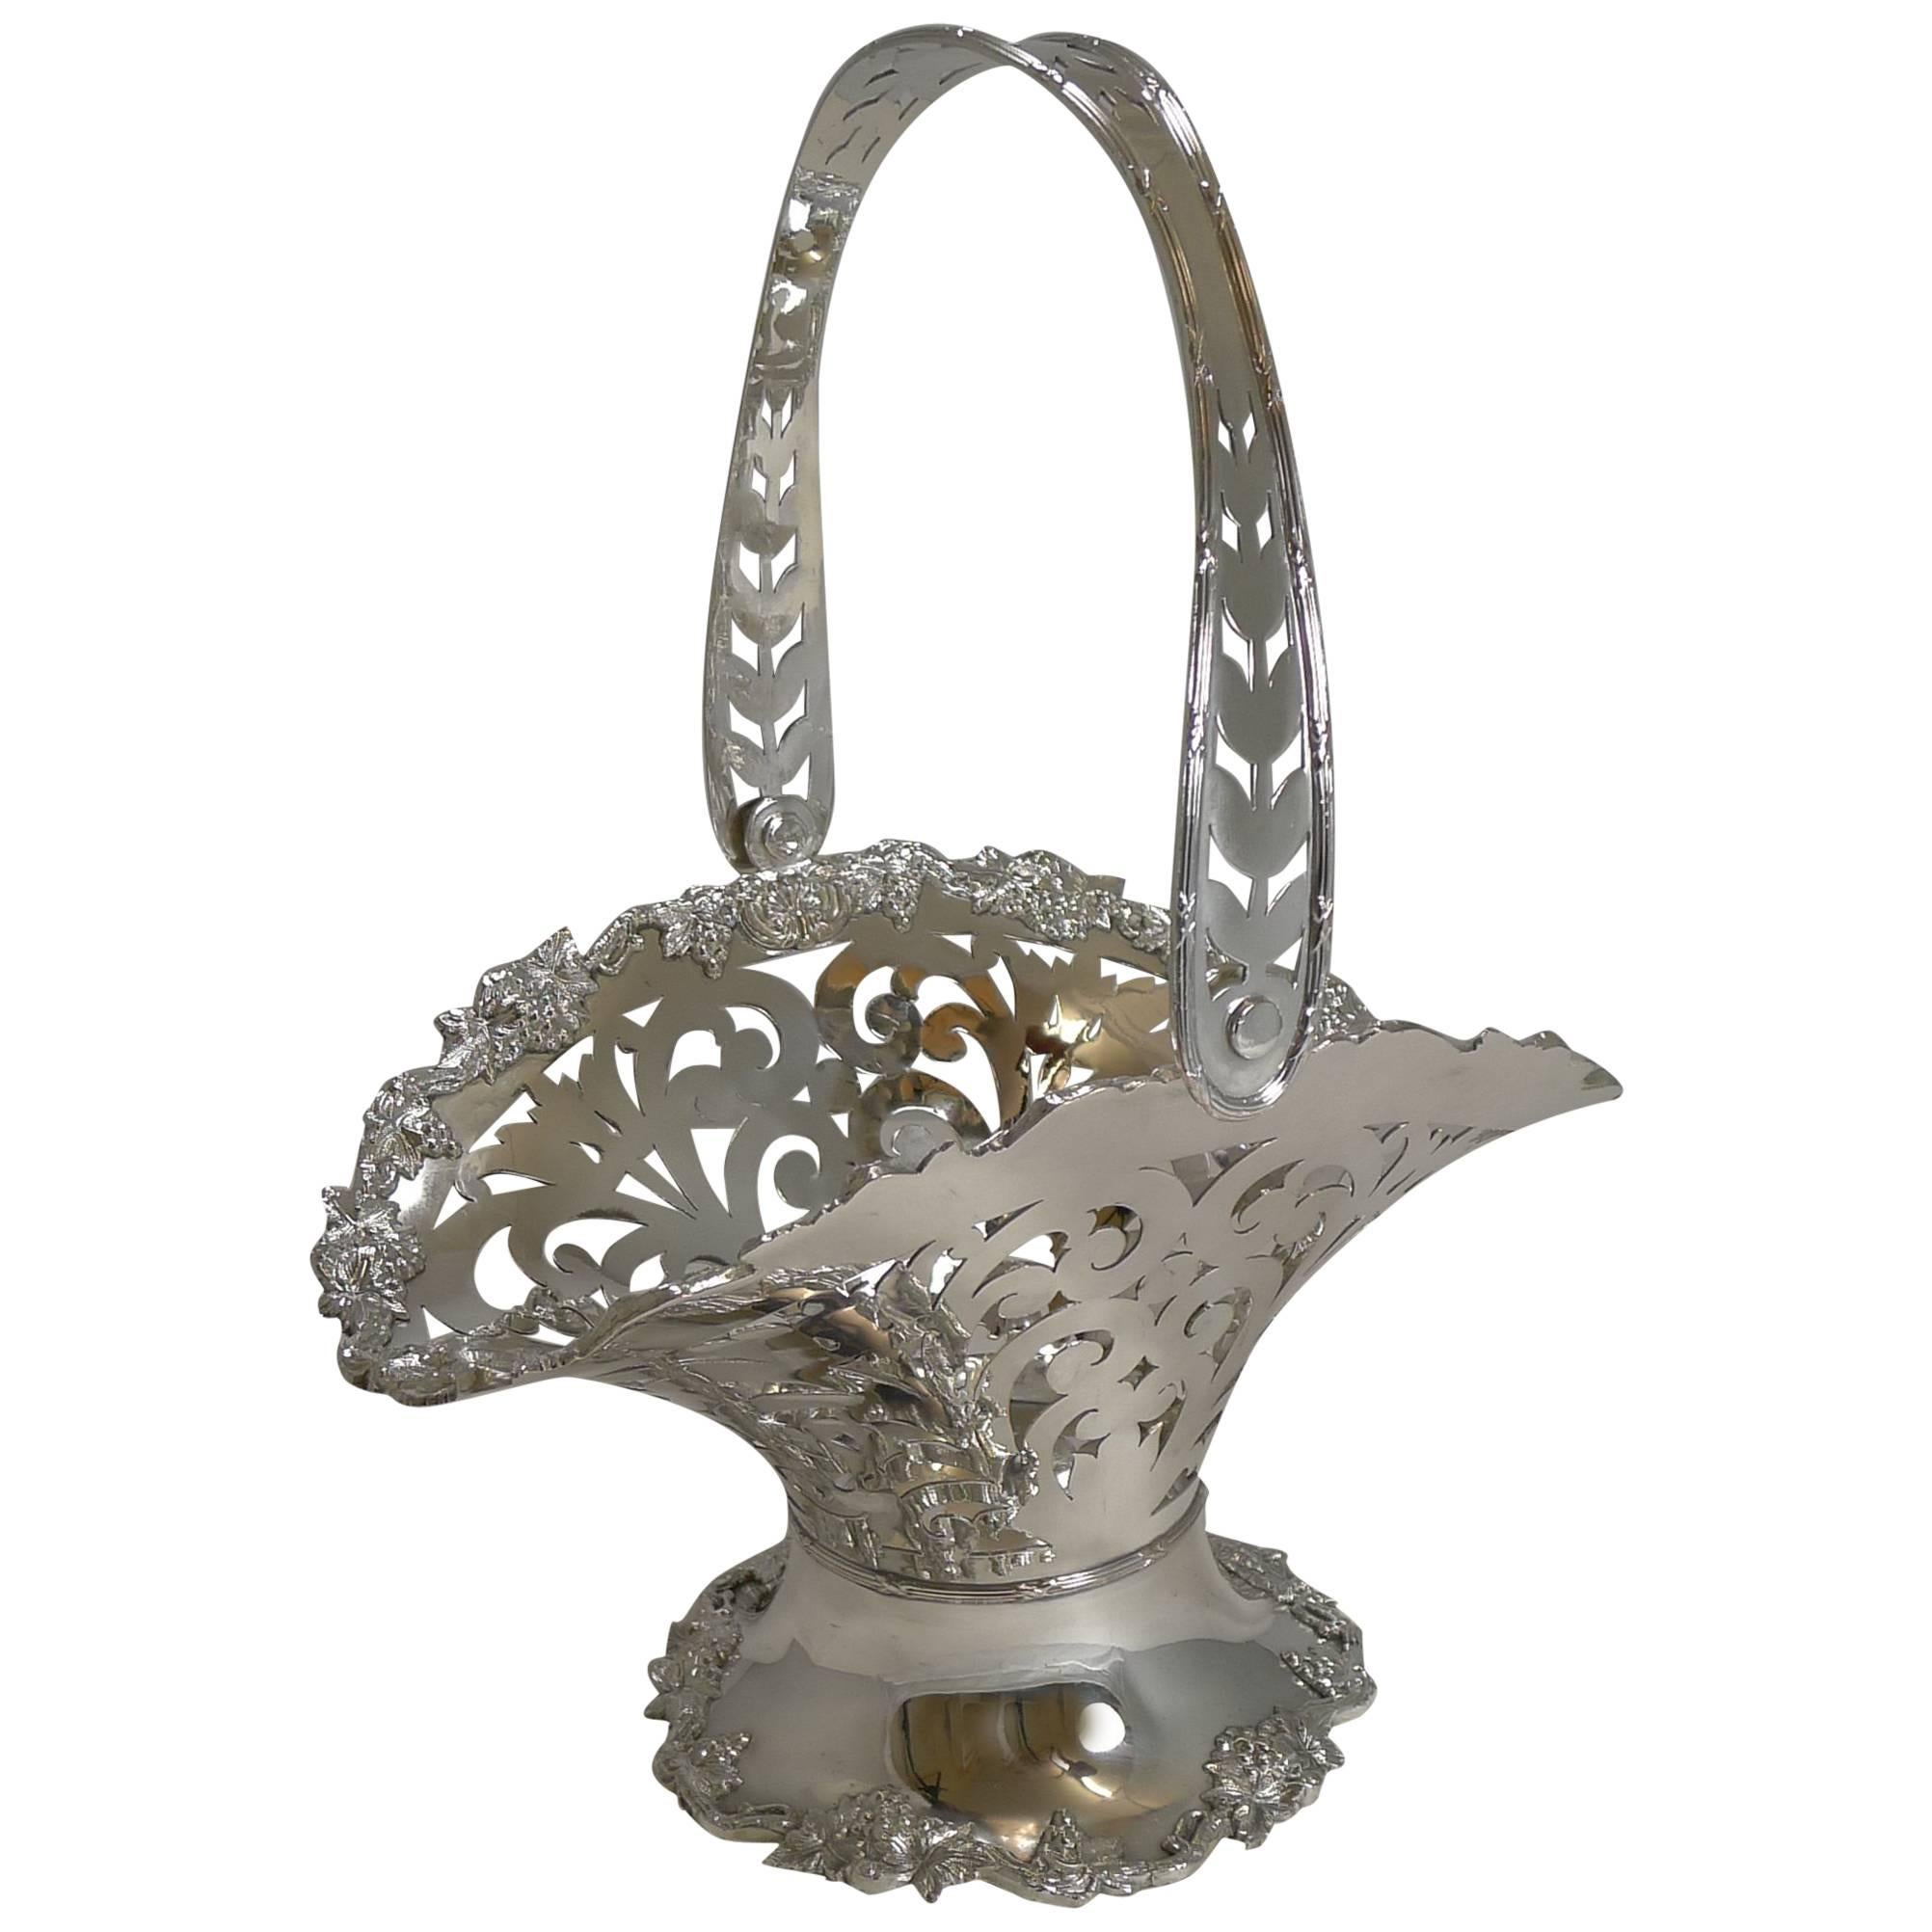 Antique English Reticulated Silver Plate Fruit Basket, circa 1900